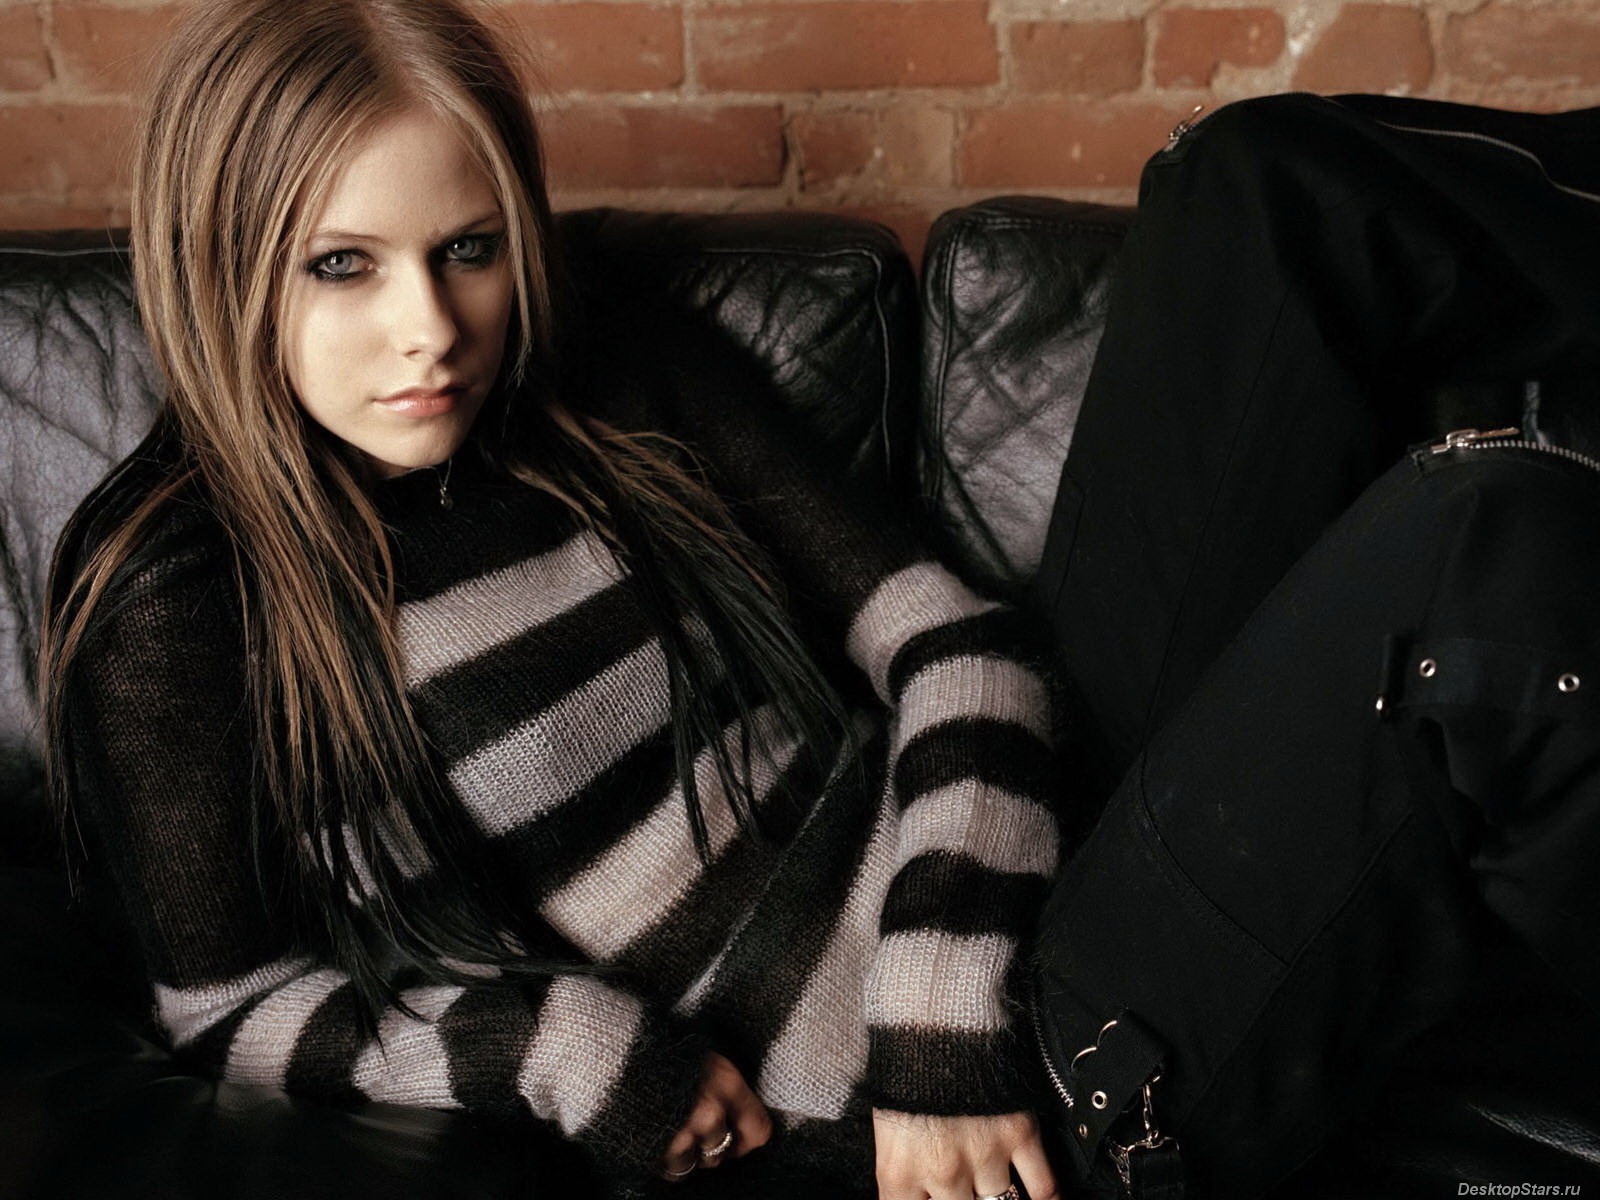 Avril Lavigne #017 - 1600x1200 Wallpapers Pictures Photos Images